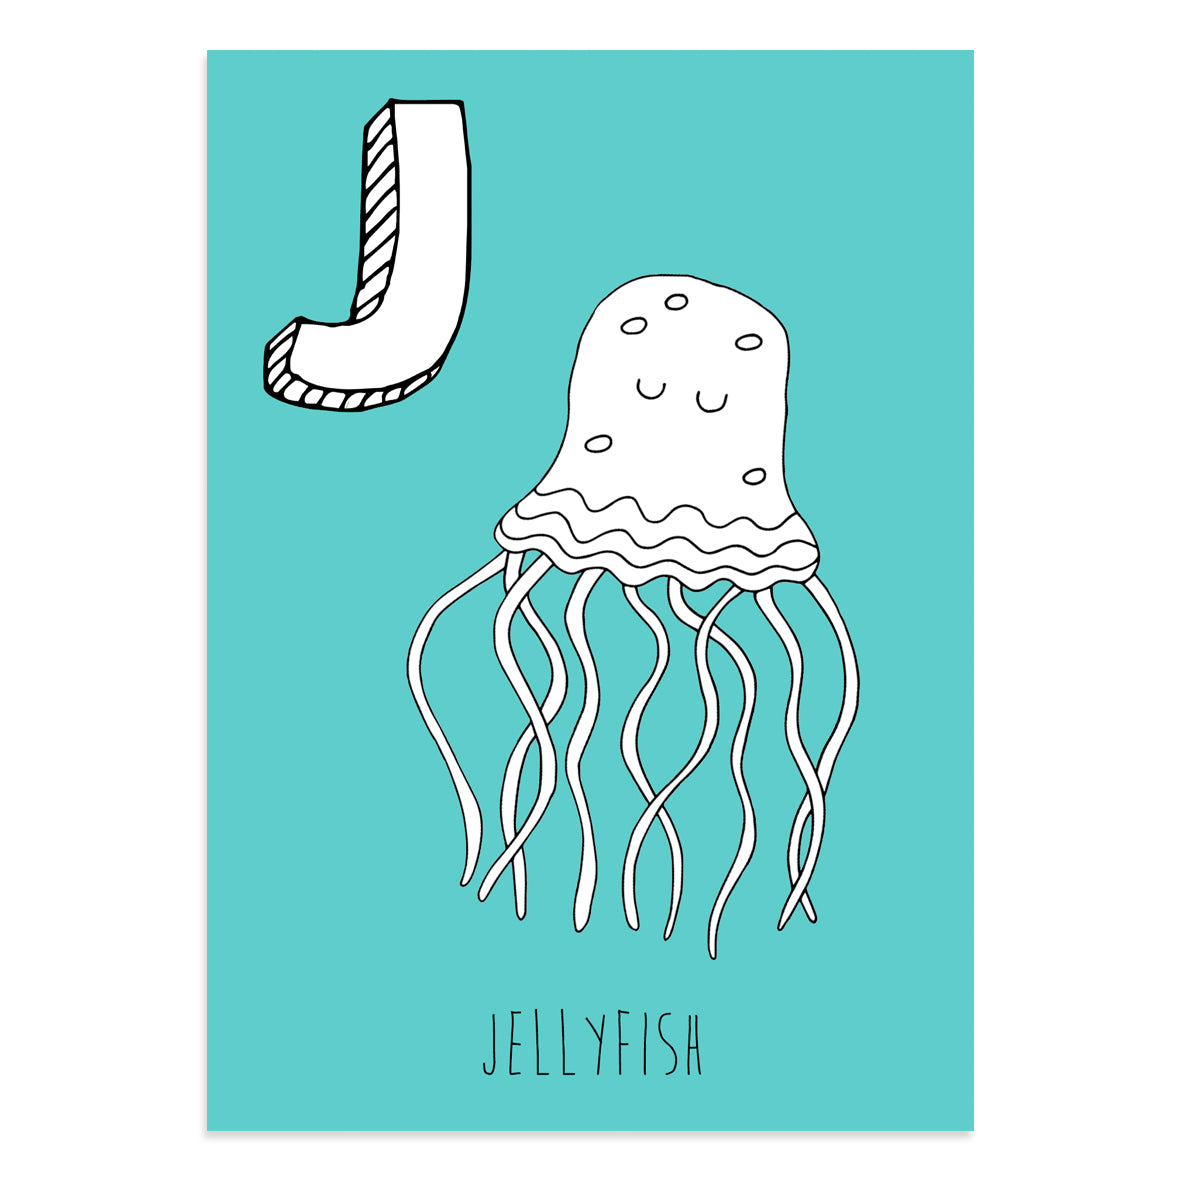 Turquoise postcard featuring a J for jellyfish